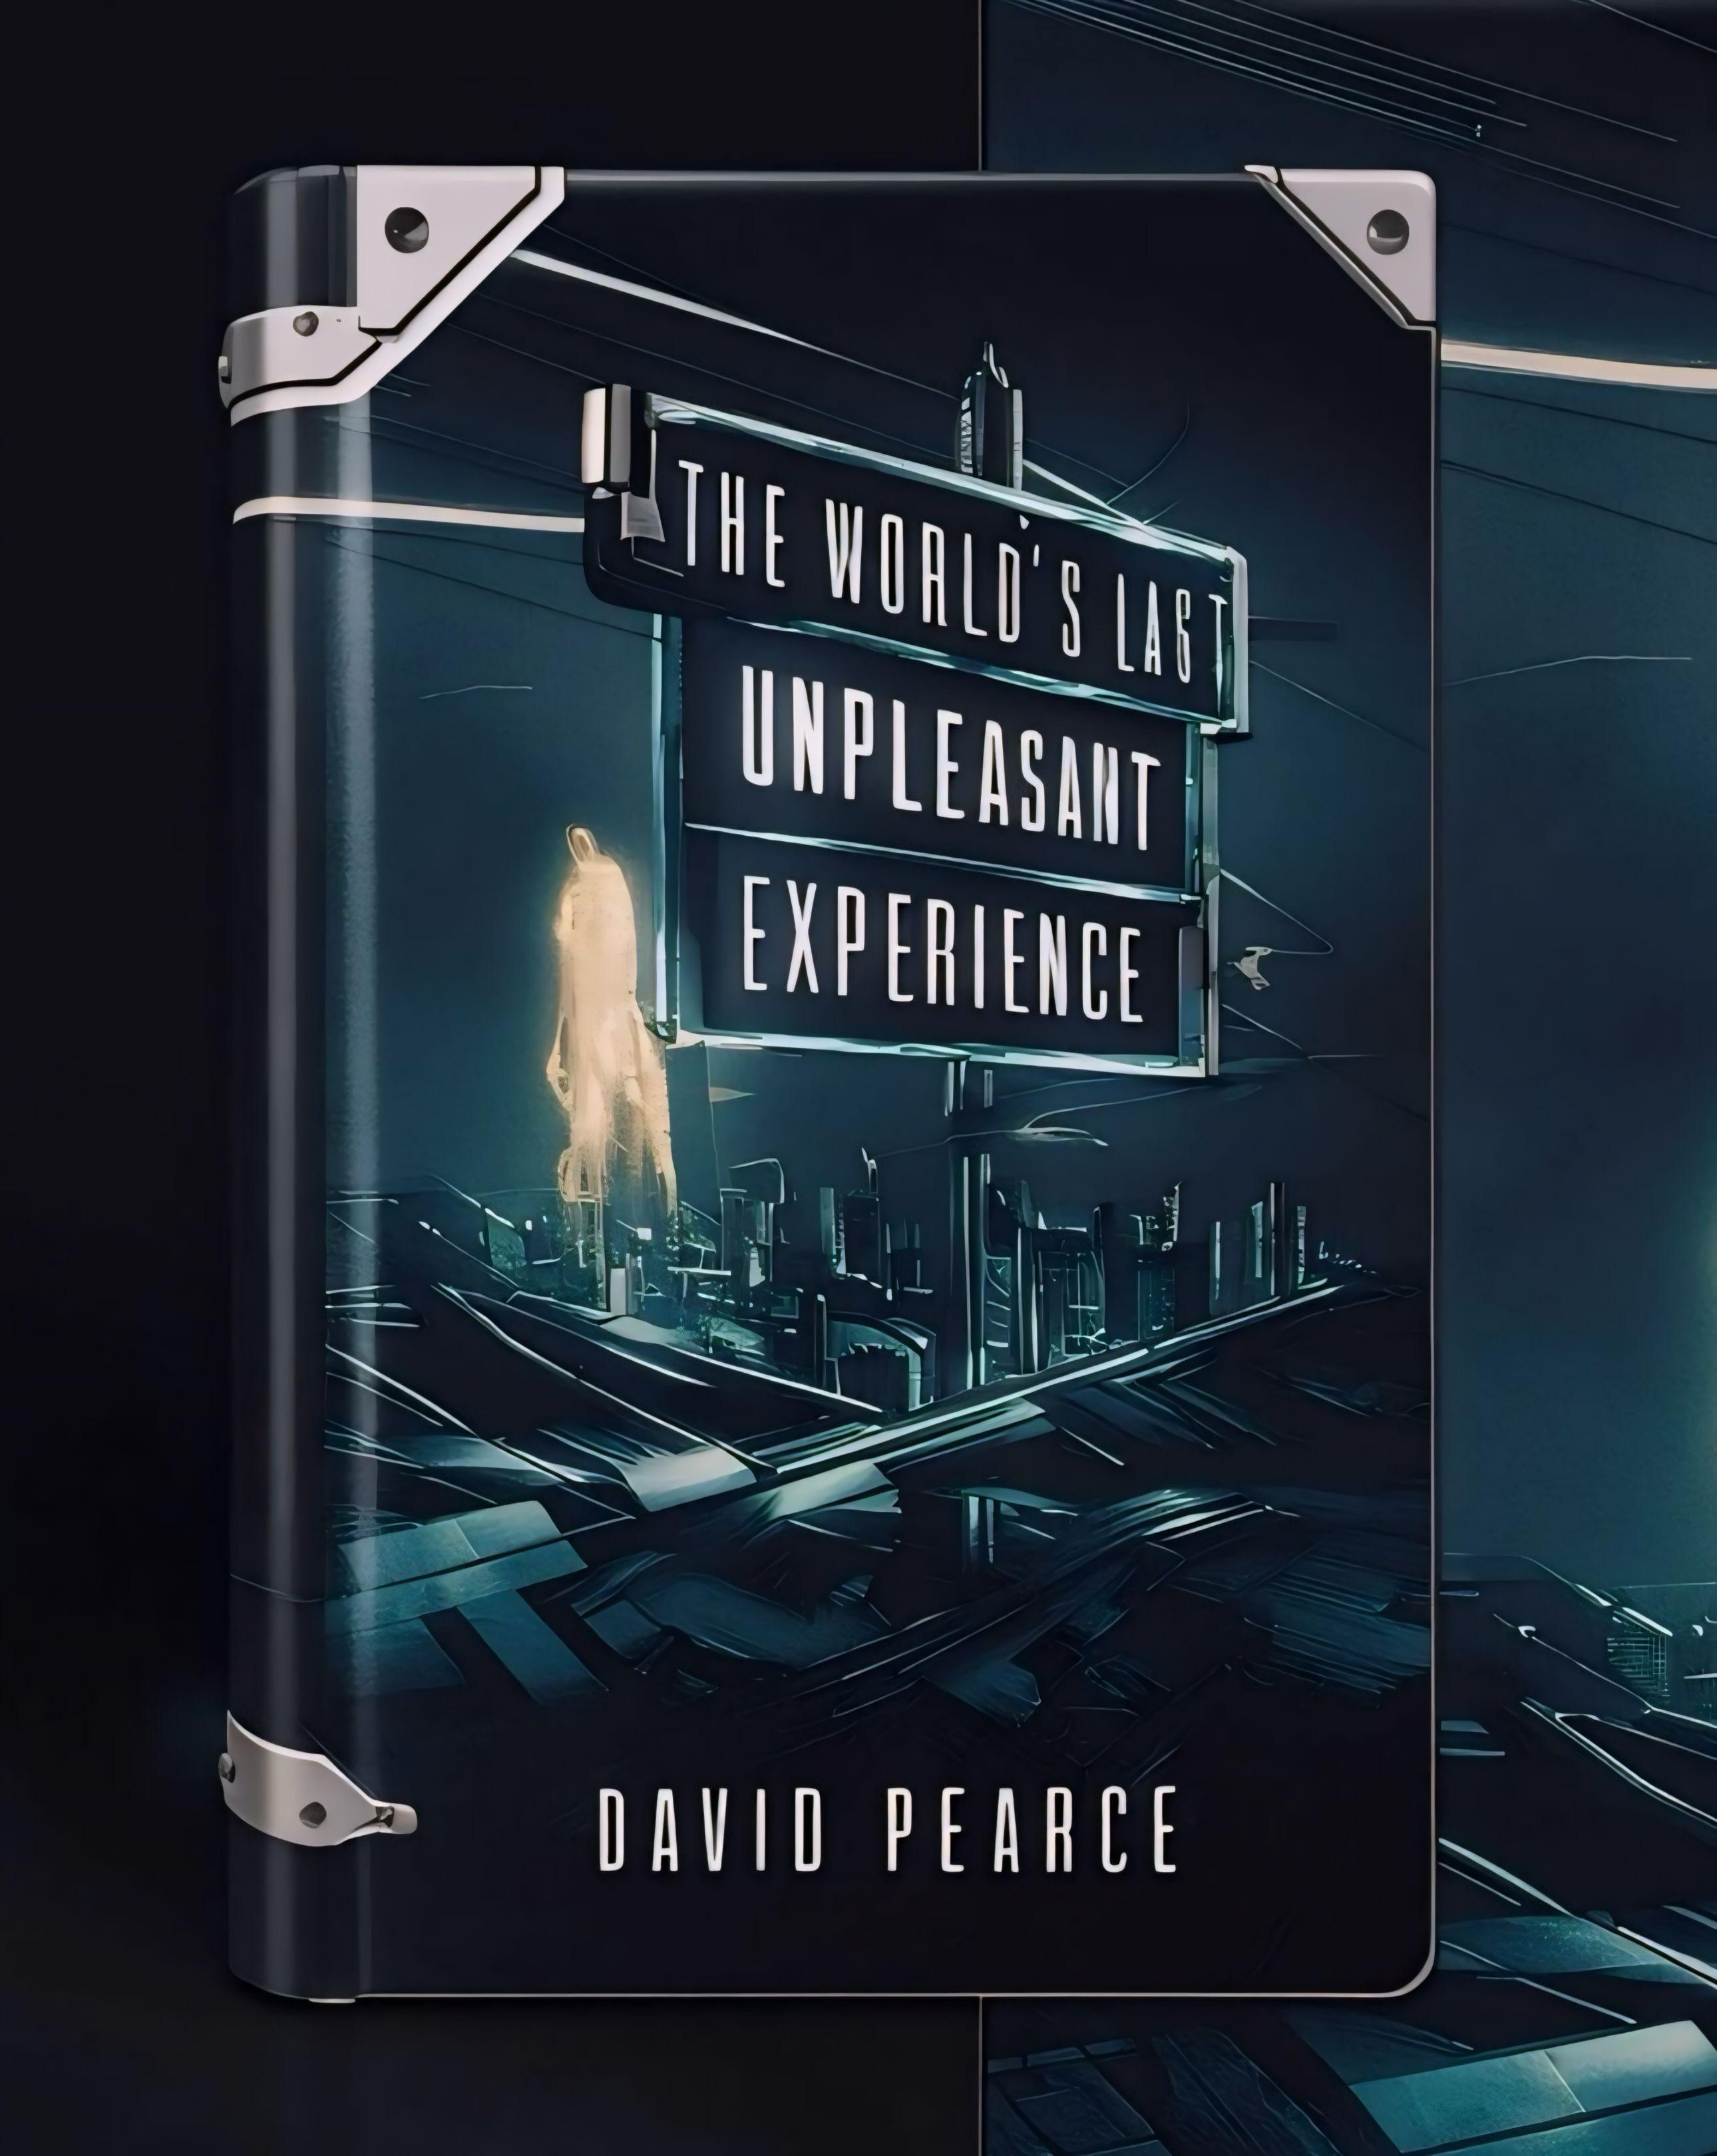 The World's Last Unpleasant Experience by David Pearce